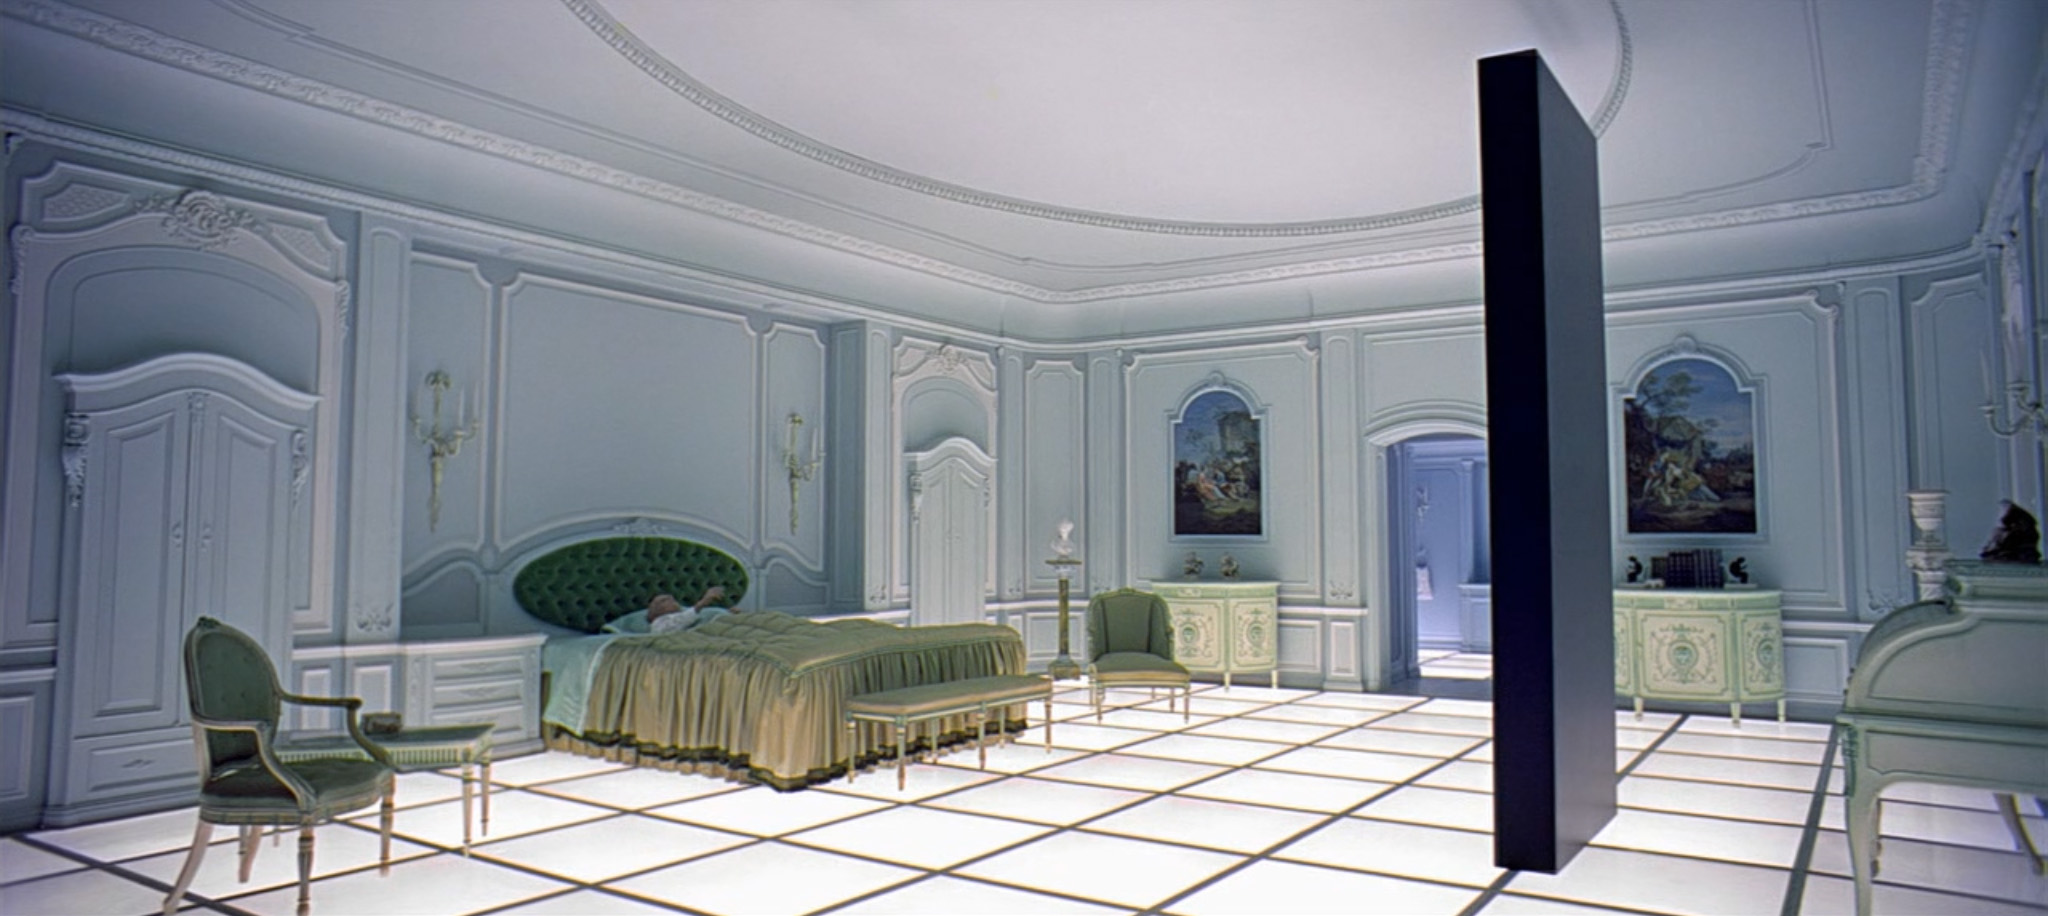 2001: A Space Odyssey (1968) — Interiors : An Online Publication about  Architecture and Film